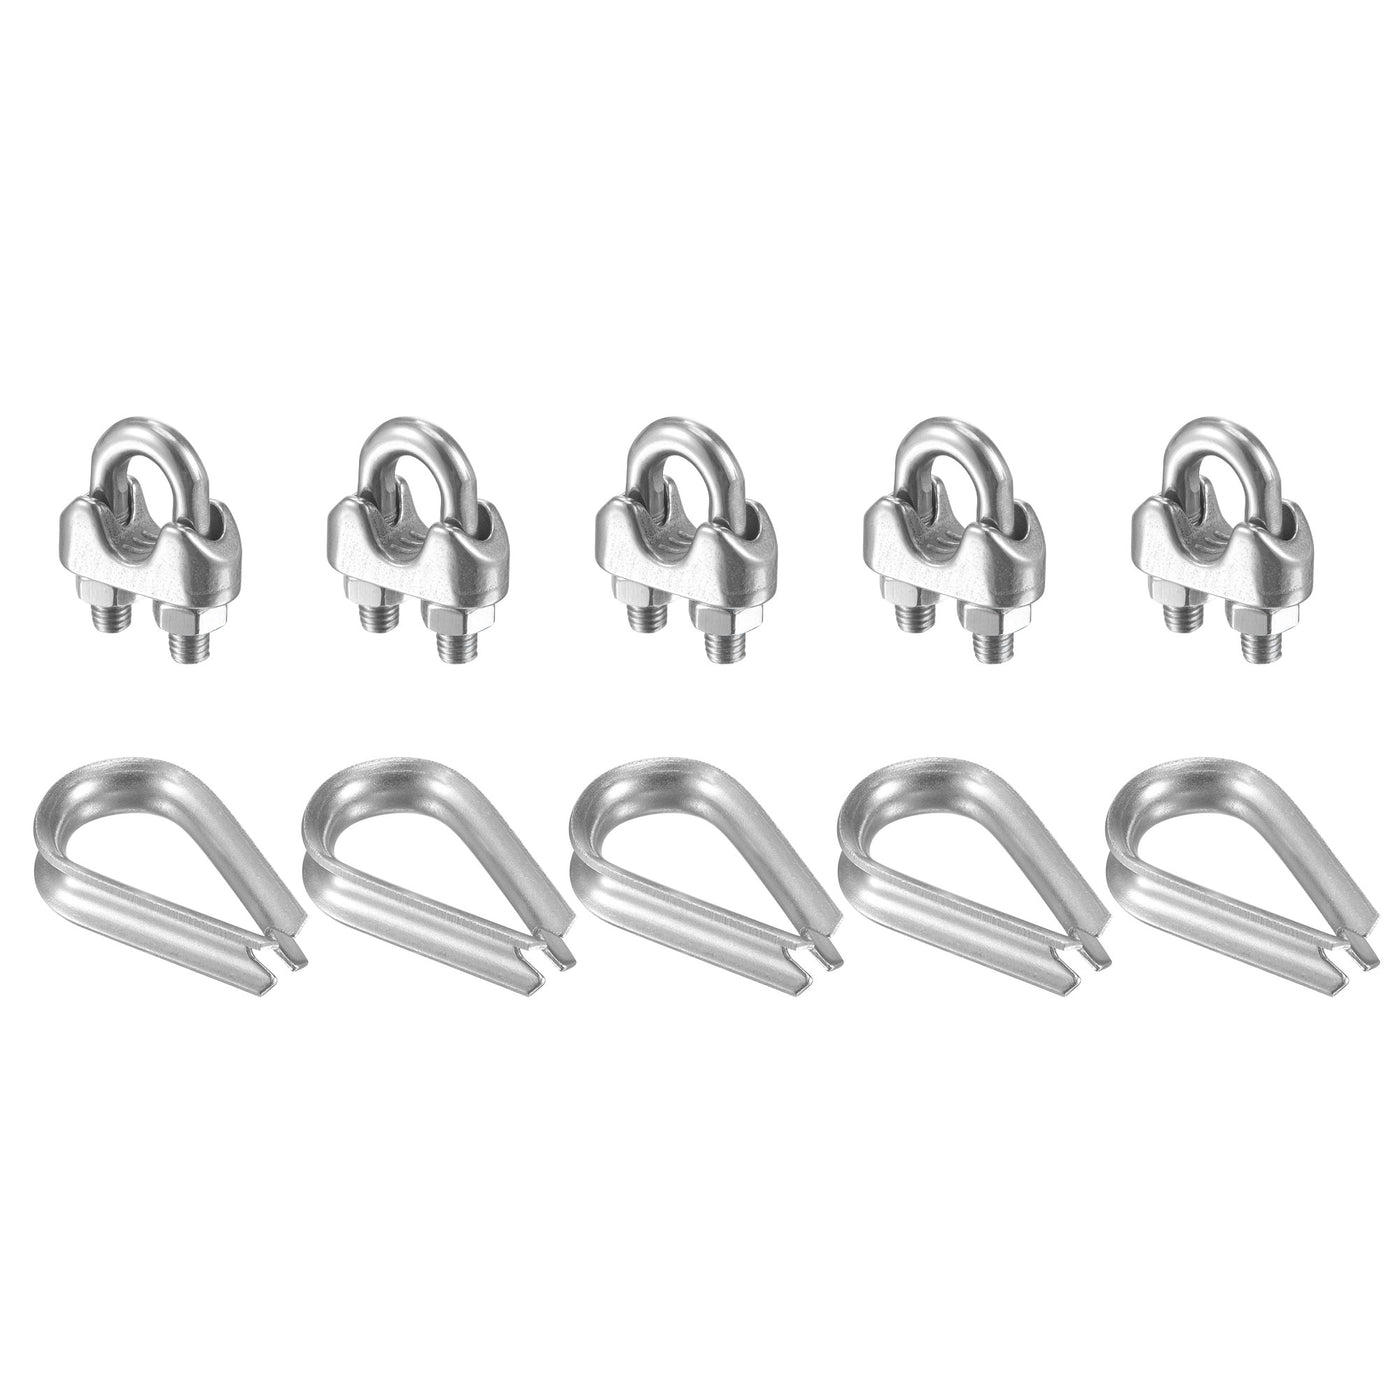 uxcell Uxcell Wire Rope Cable Clip Kit for M5, Included Rope Clamp 5Pcs and Thimble Rigging 5Pcs, 304 Stainless Steel U Bolt Saddle Fastener